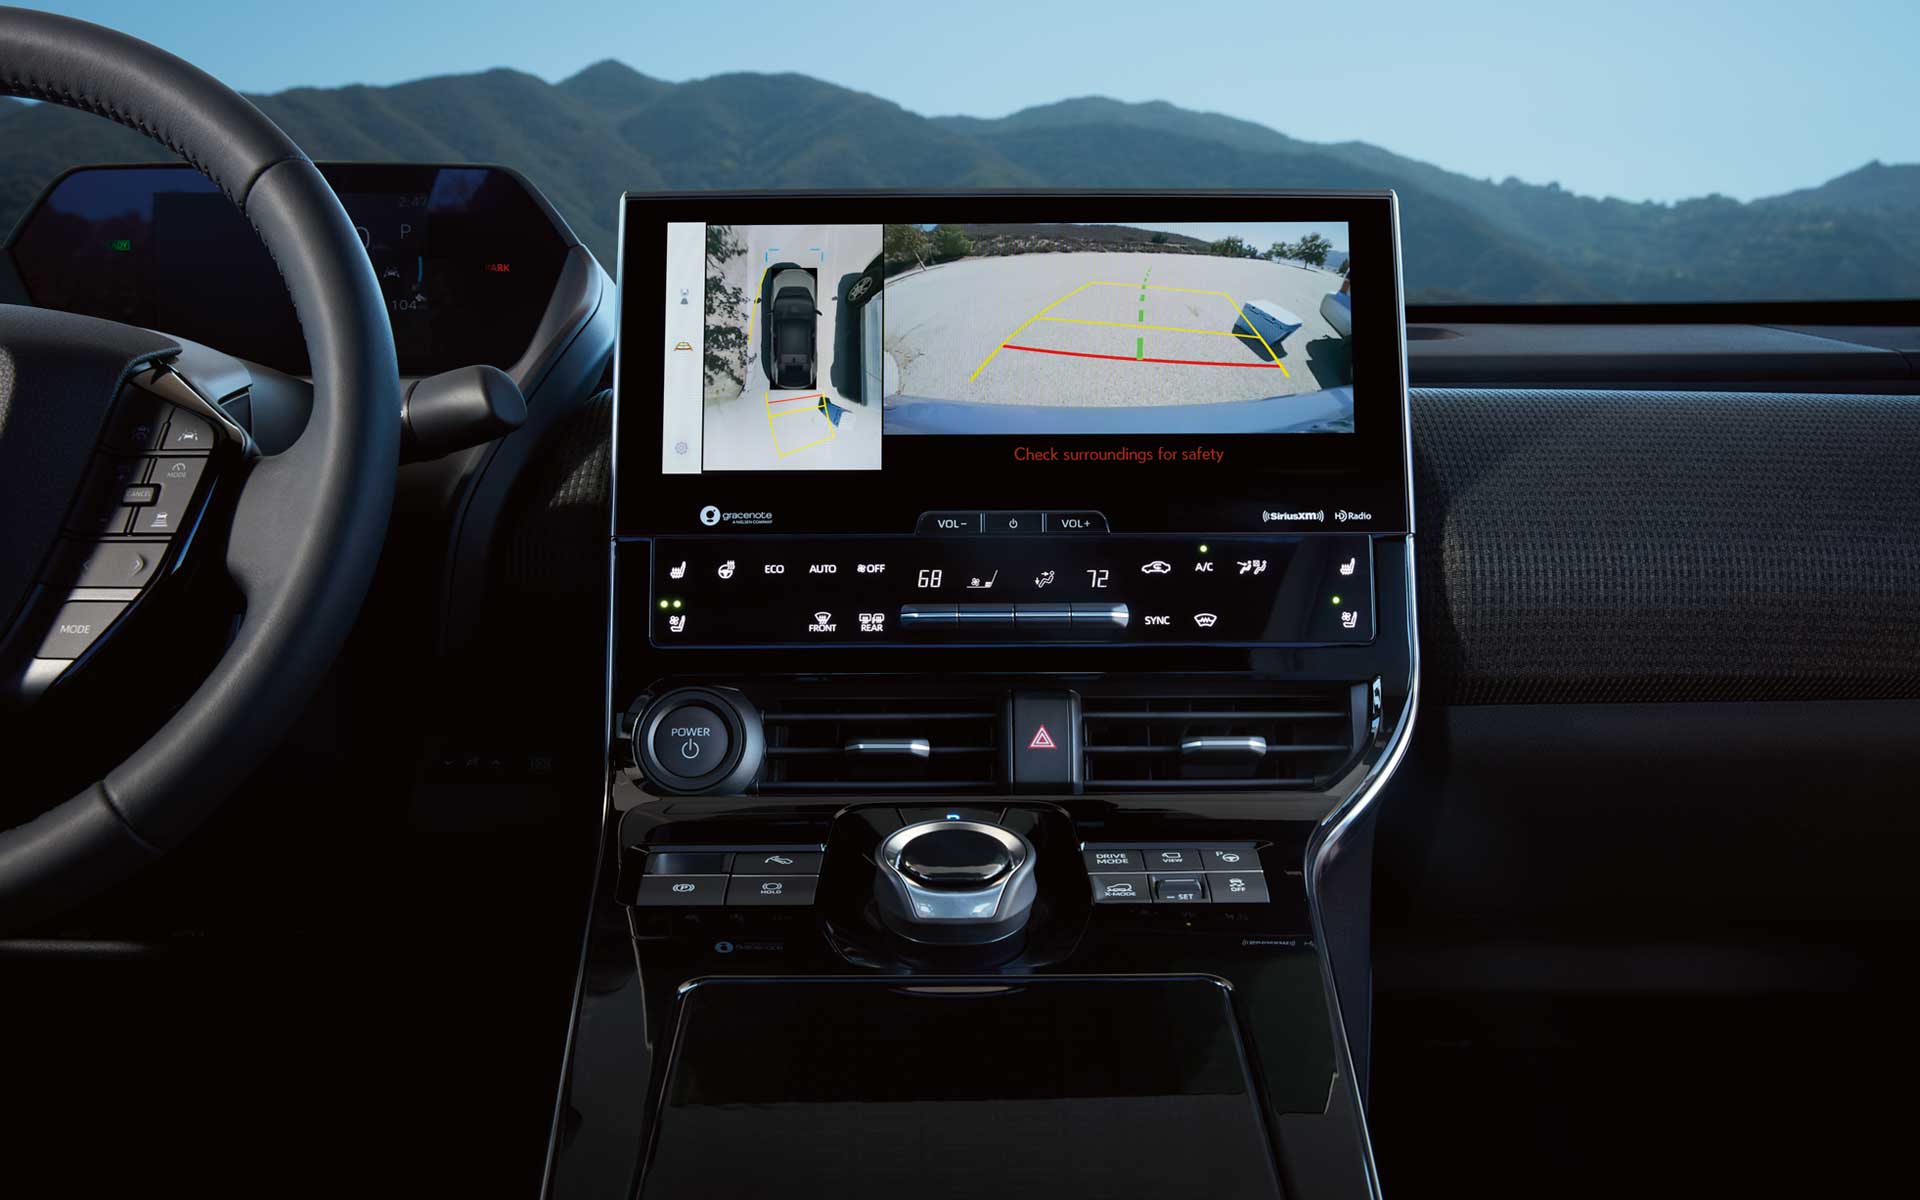 360 degree camera displaying on the infotainment screen of a Subaru Solterra